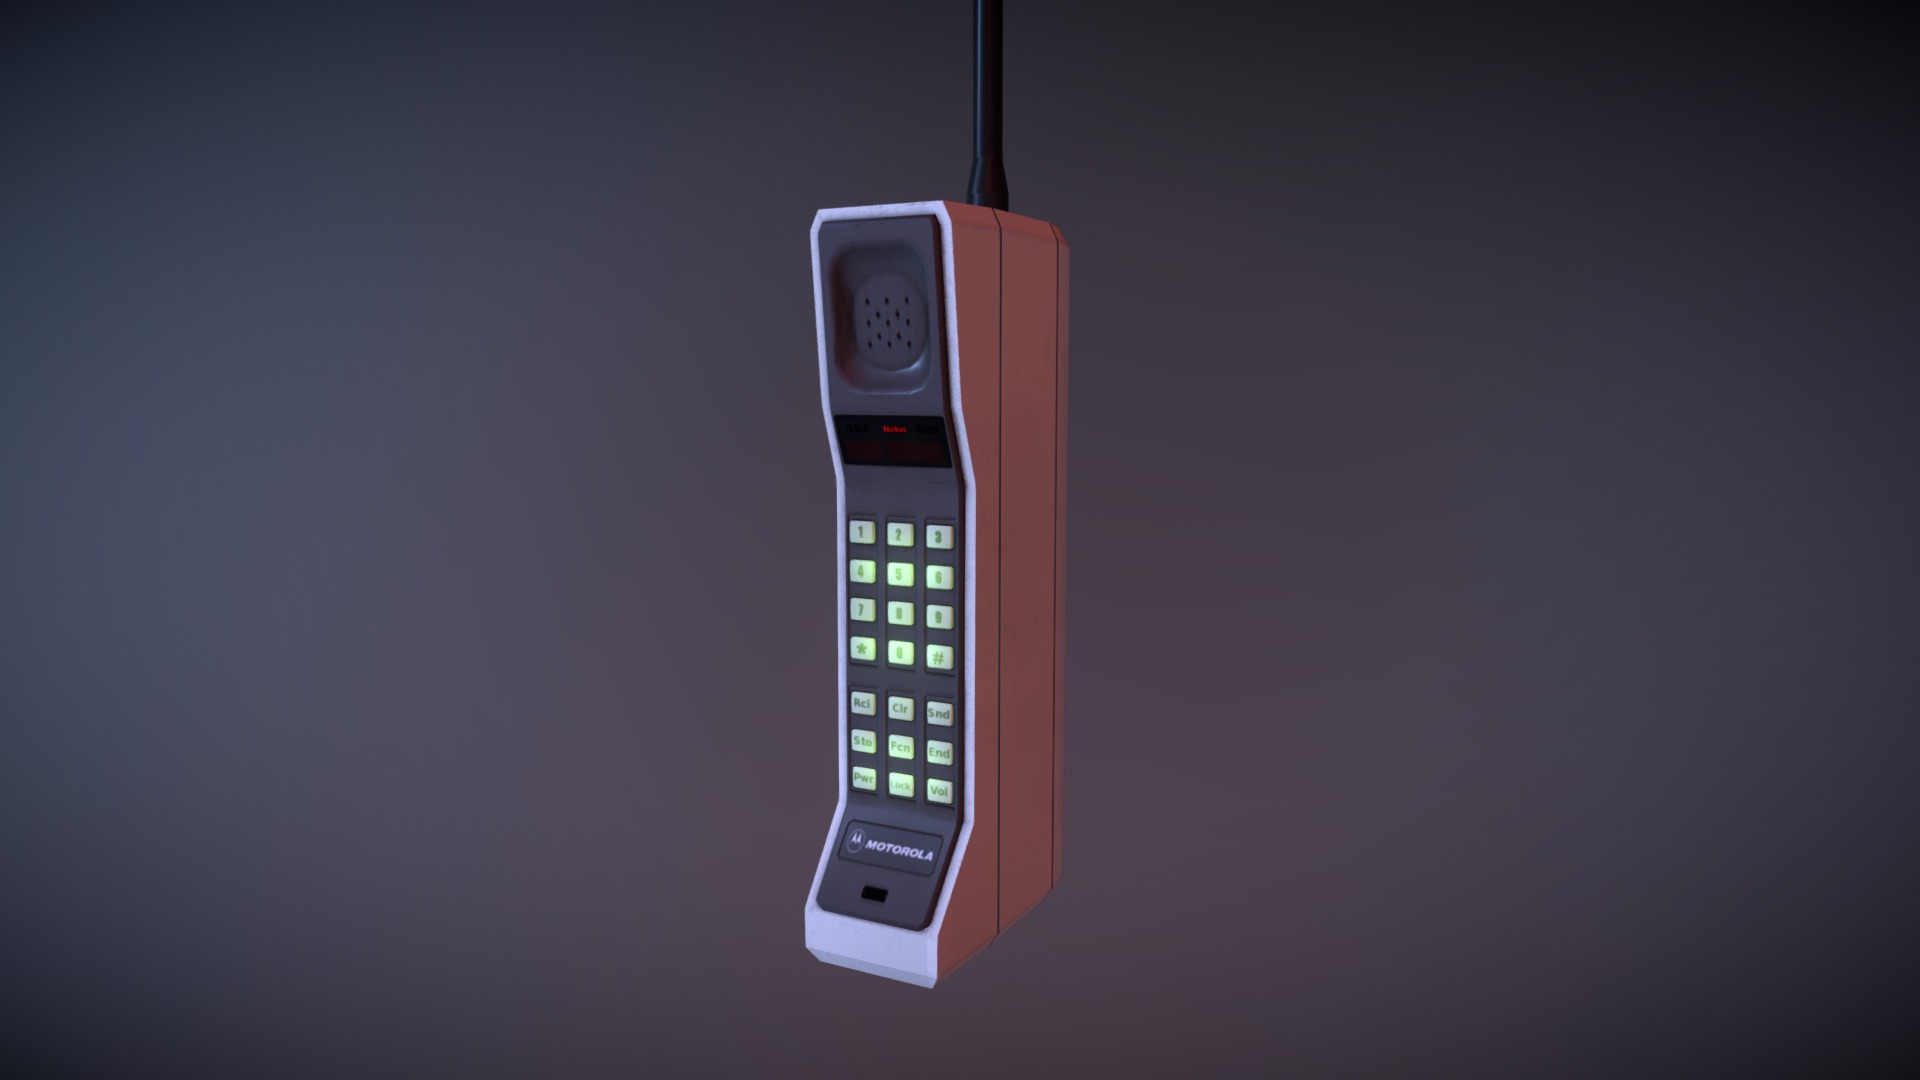 Model of the first commercially available mobile phone The Motorola DynaTAC 8000X. Made in Cinema 4D and substance painter.
Download for SFM: soon™ - MOTOROLA DYNATAC 8000X - 3D model by Unconid 3d model